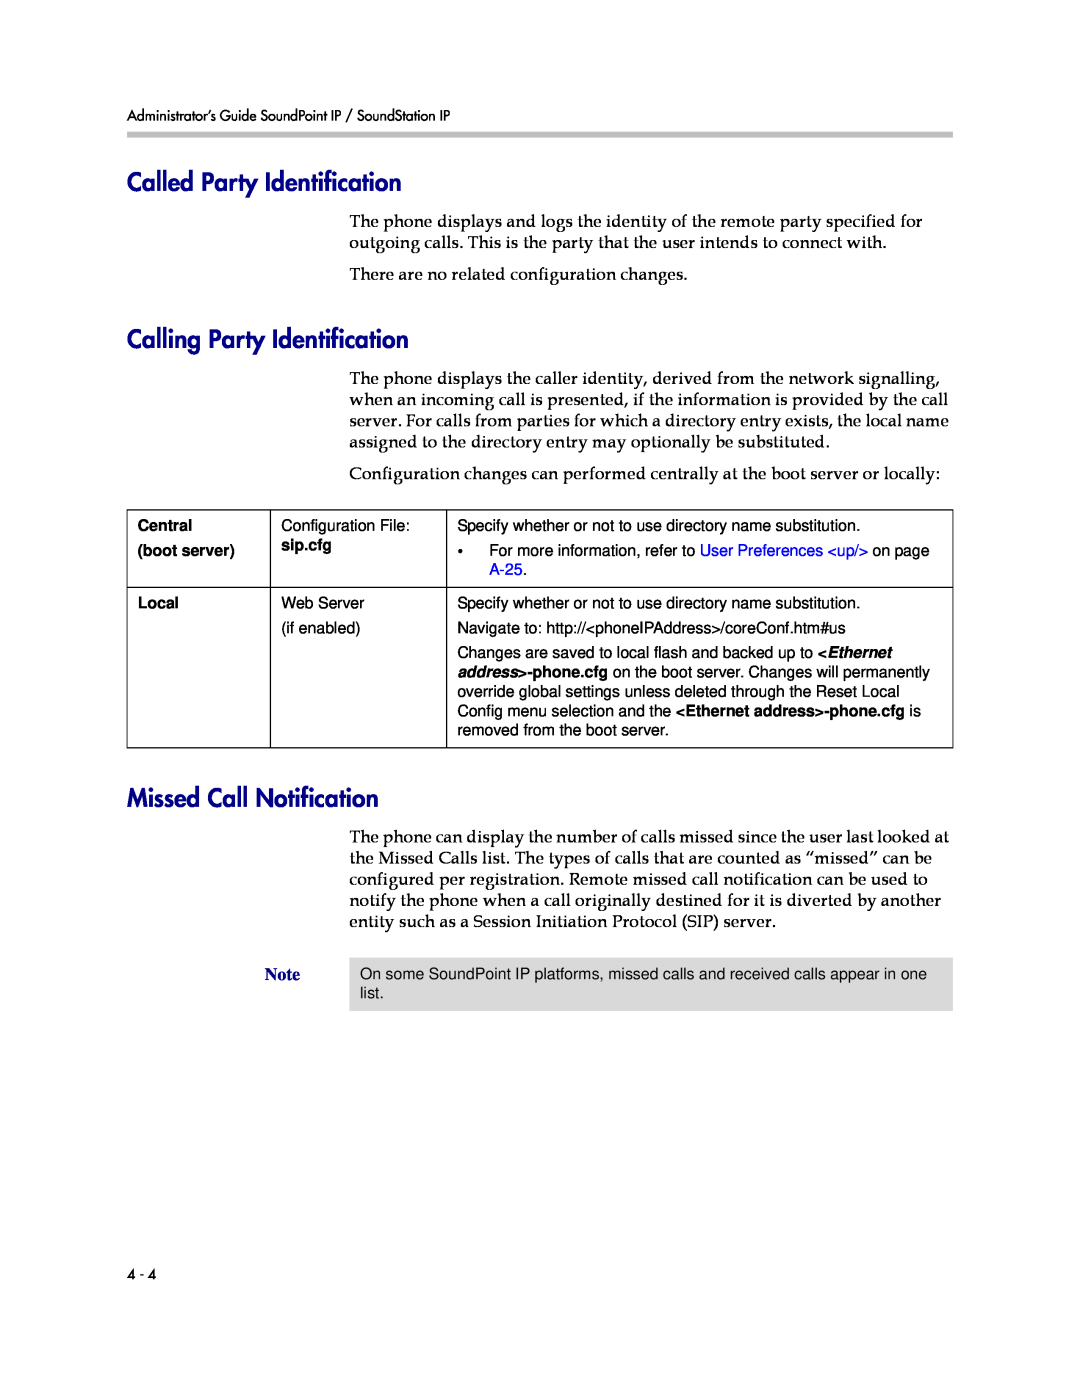 Polycom SIP 3.1 manual Called Party Identification, Calling Party Identification, Missed Call Notification, A-25 